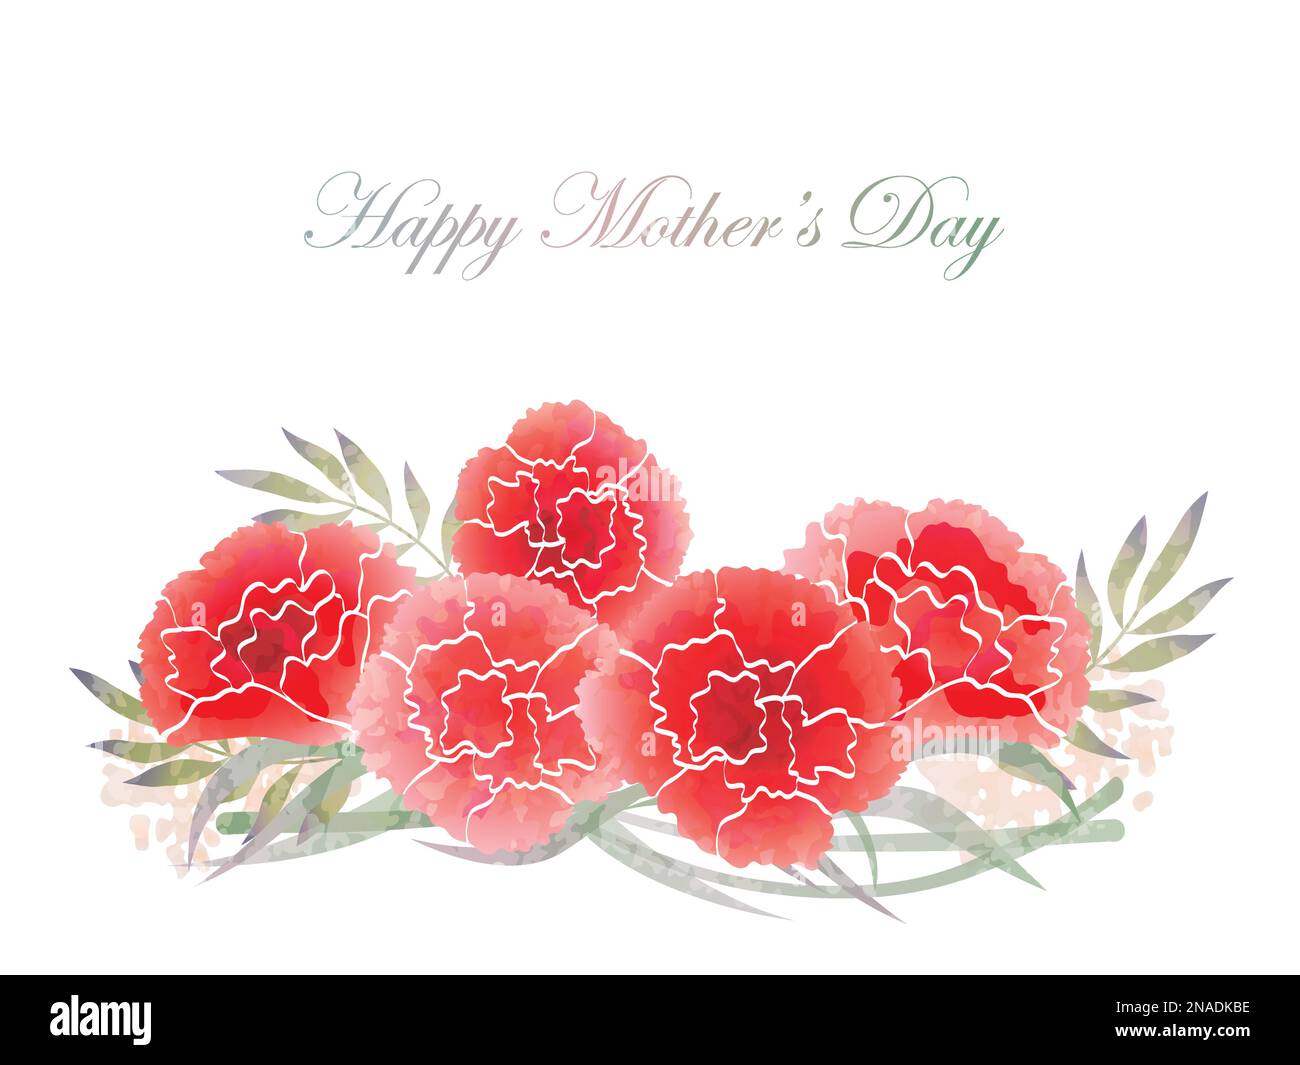 Happy Mother’s Day Vector Card Template With Watercolor Carnation Illustration And Text Space. Stock Vector